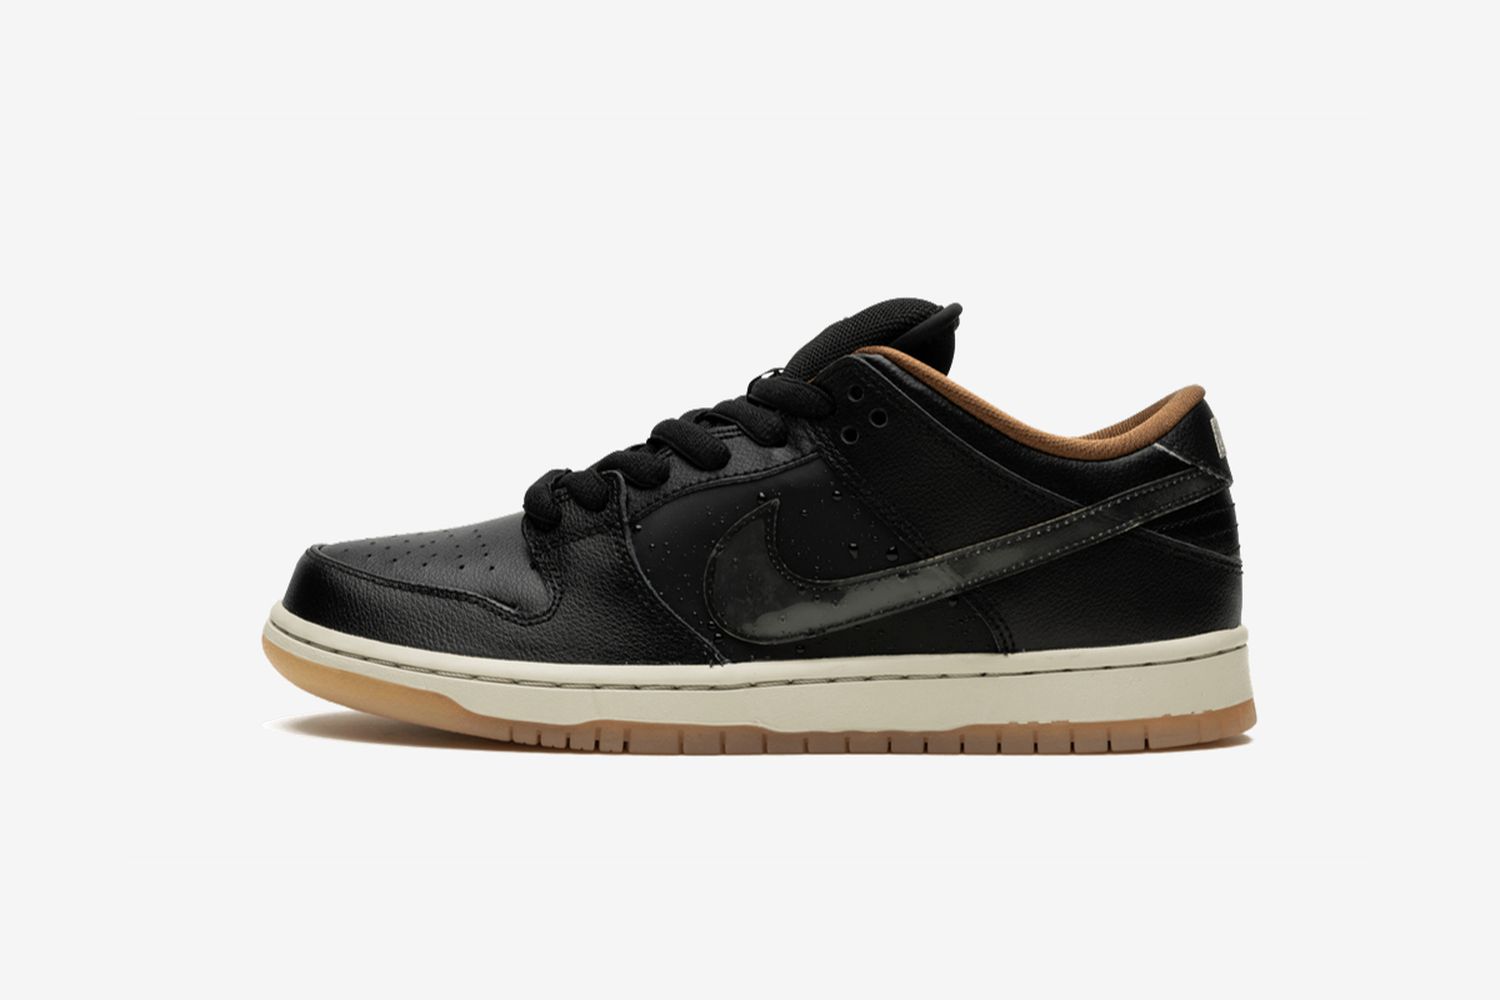 13 nike sb dunk sale of the Best Nike SB Dunks Reselling for Under $300